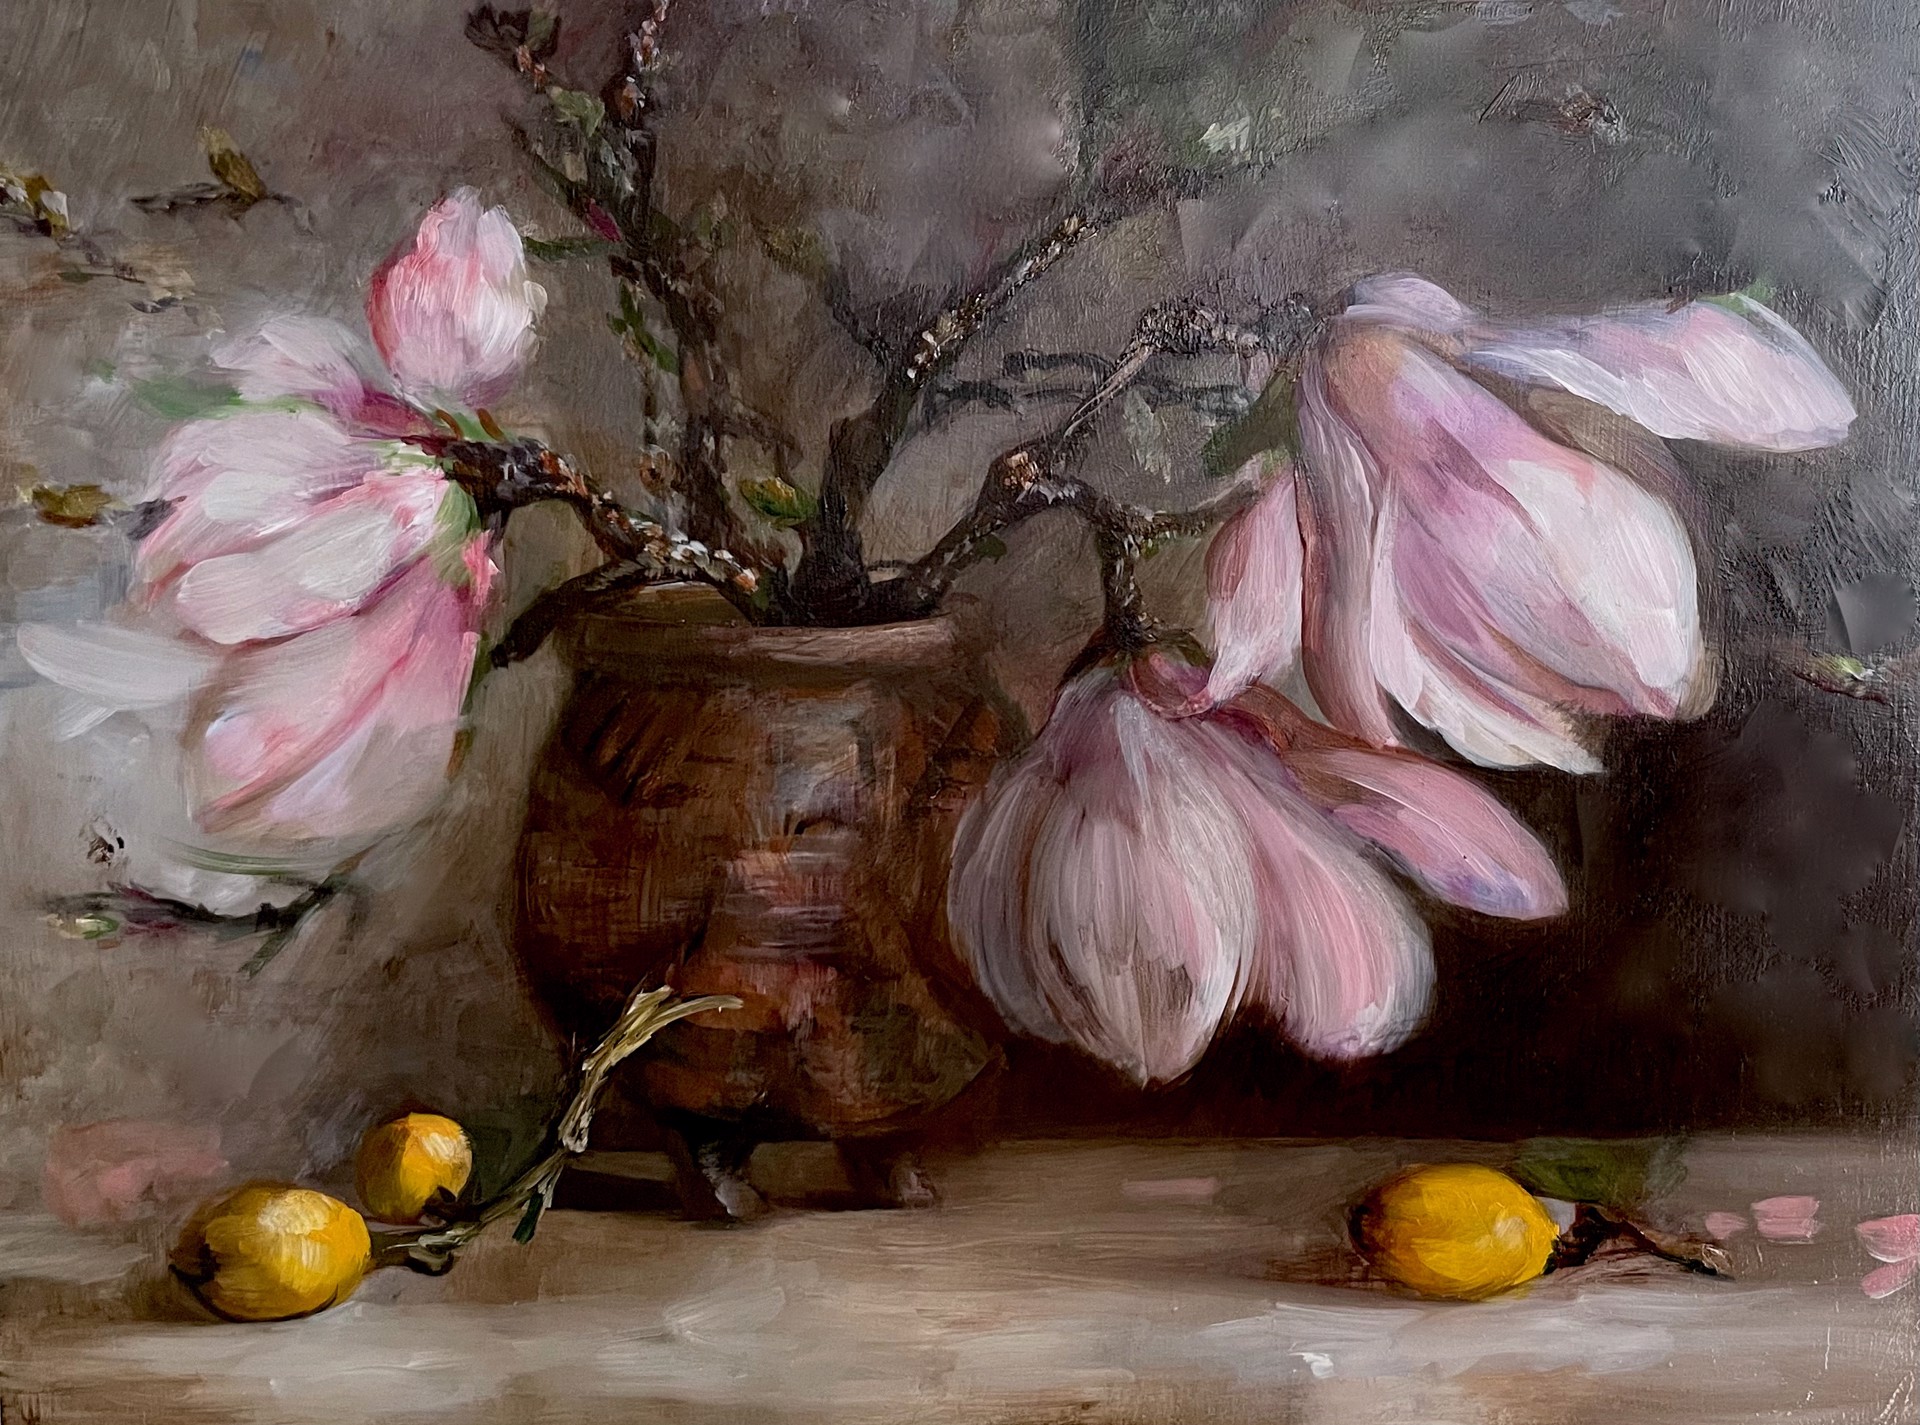 Between Seasons (Japanese Magnolia Blossoms with Loquats) by Saskia Ozols